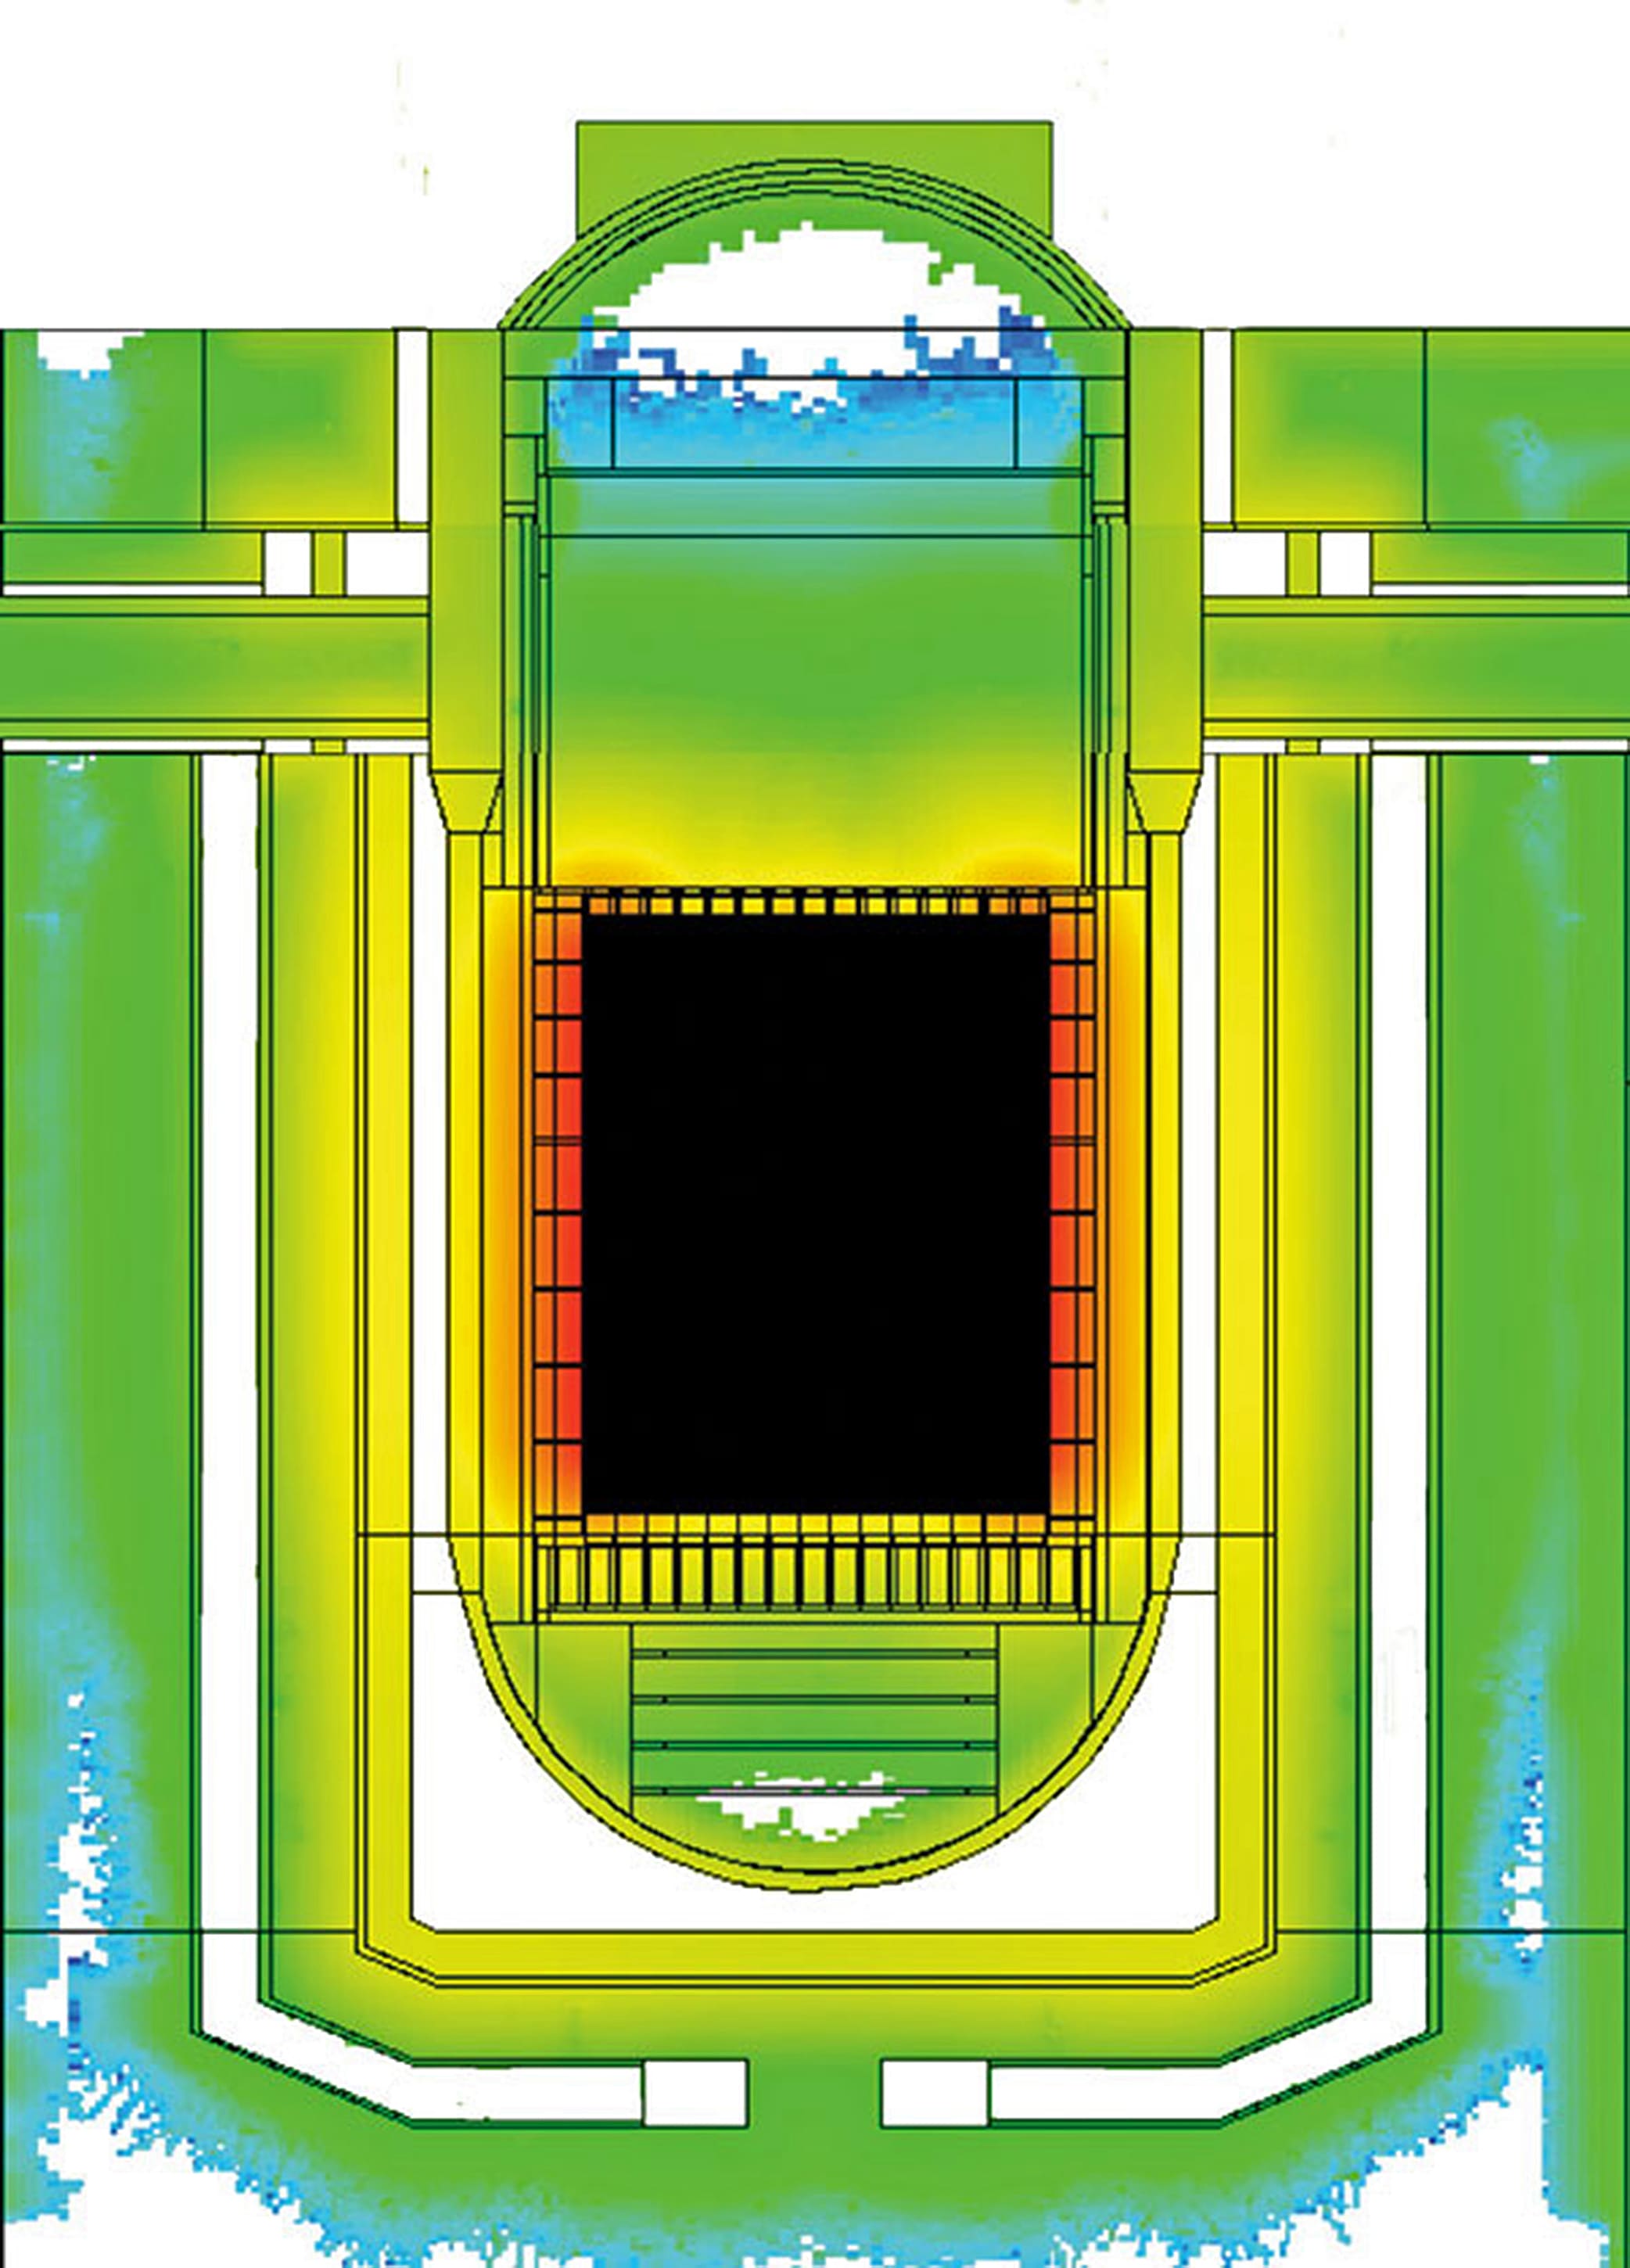 Neutron intensity distribution at the vertical section of the 3D activation model of the NPP Biblis, reactor unit B: The reactor core (black) is enclosed by the reactor pressure vessel. Stronger activation (red) prevails near the core. The activity decreases from green to blue. Areas of the bottom of the reactor pit and the area in the reactor pressure vessel below the reactor head have no reactor neutrons (white). Parts of these components can be disposed of cost-effectively as conventional waste because they have not been activated.